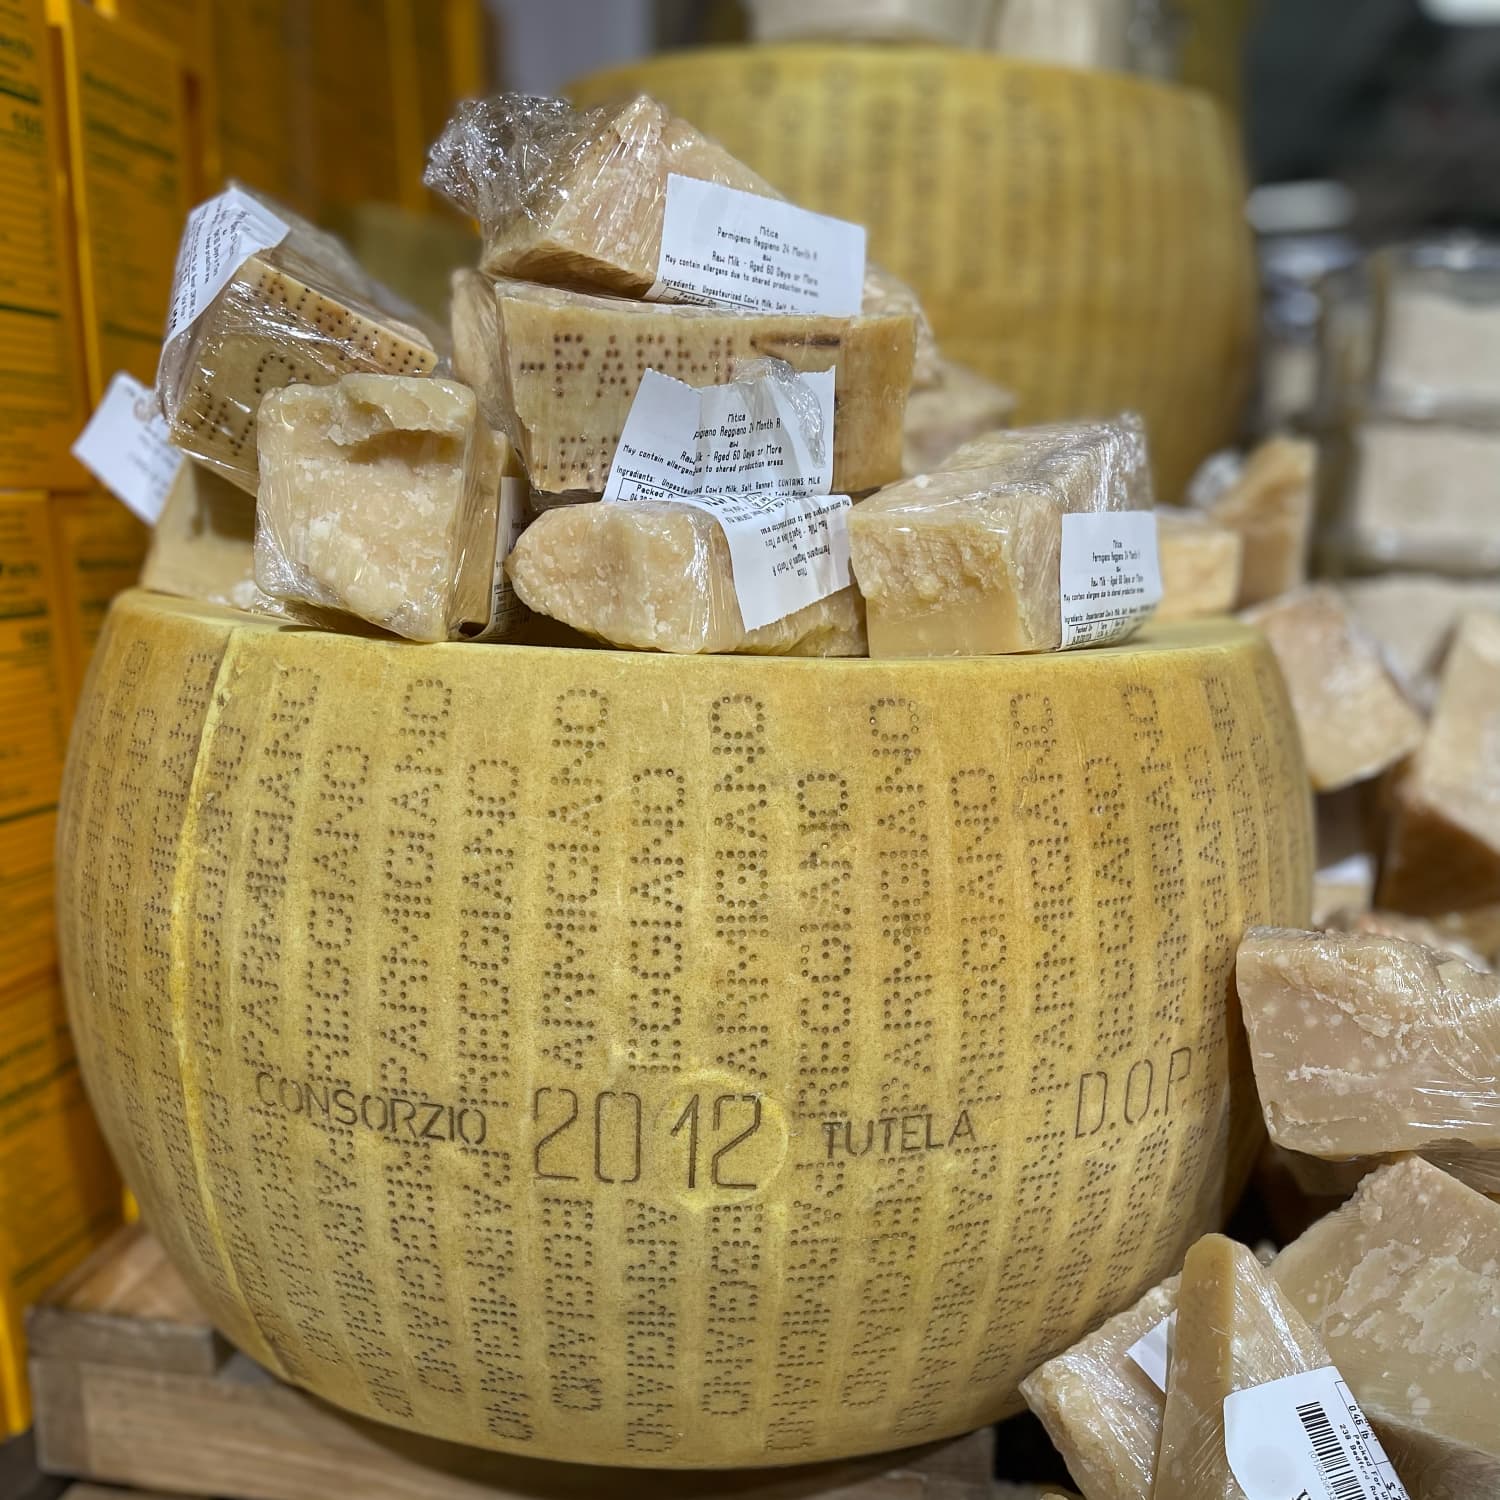 3 Things You Should Know Before Buying Parmigiano Reggiano